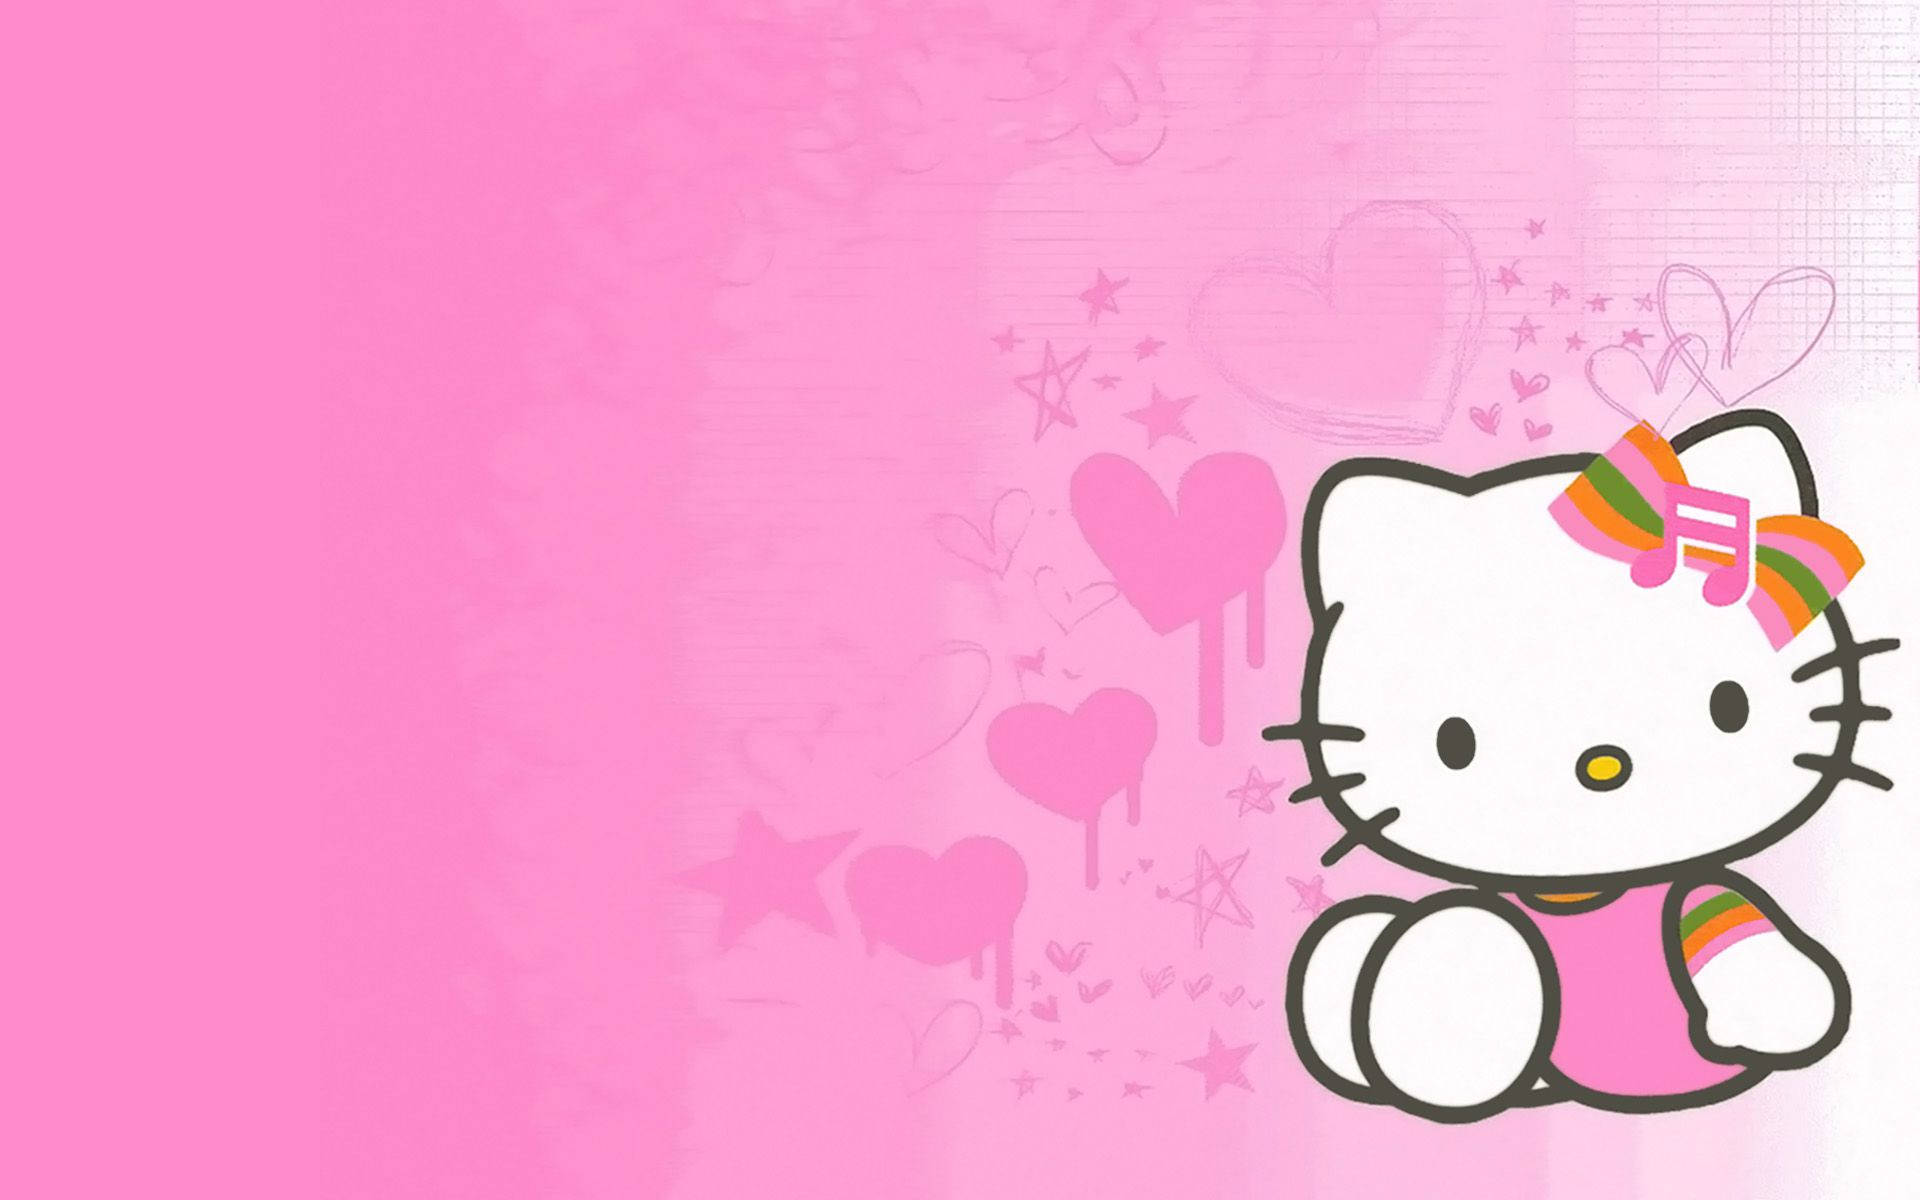 100+] Hello Kitty Aesthetic Pictures | Wallpapers.com